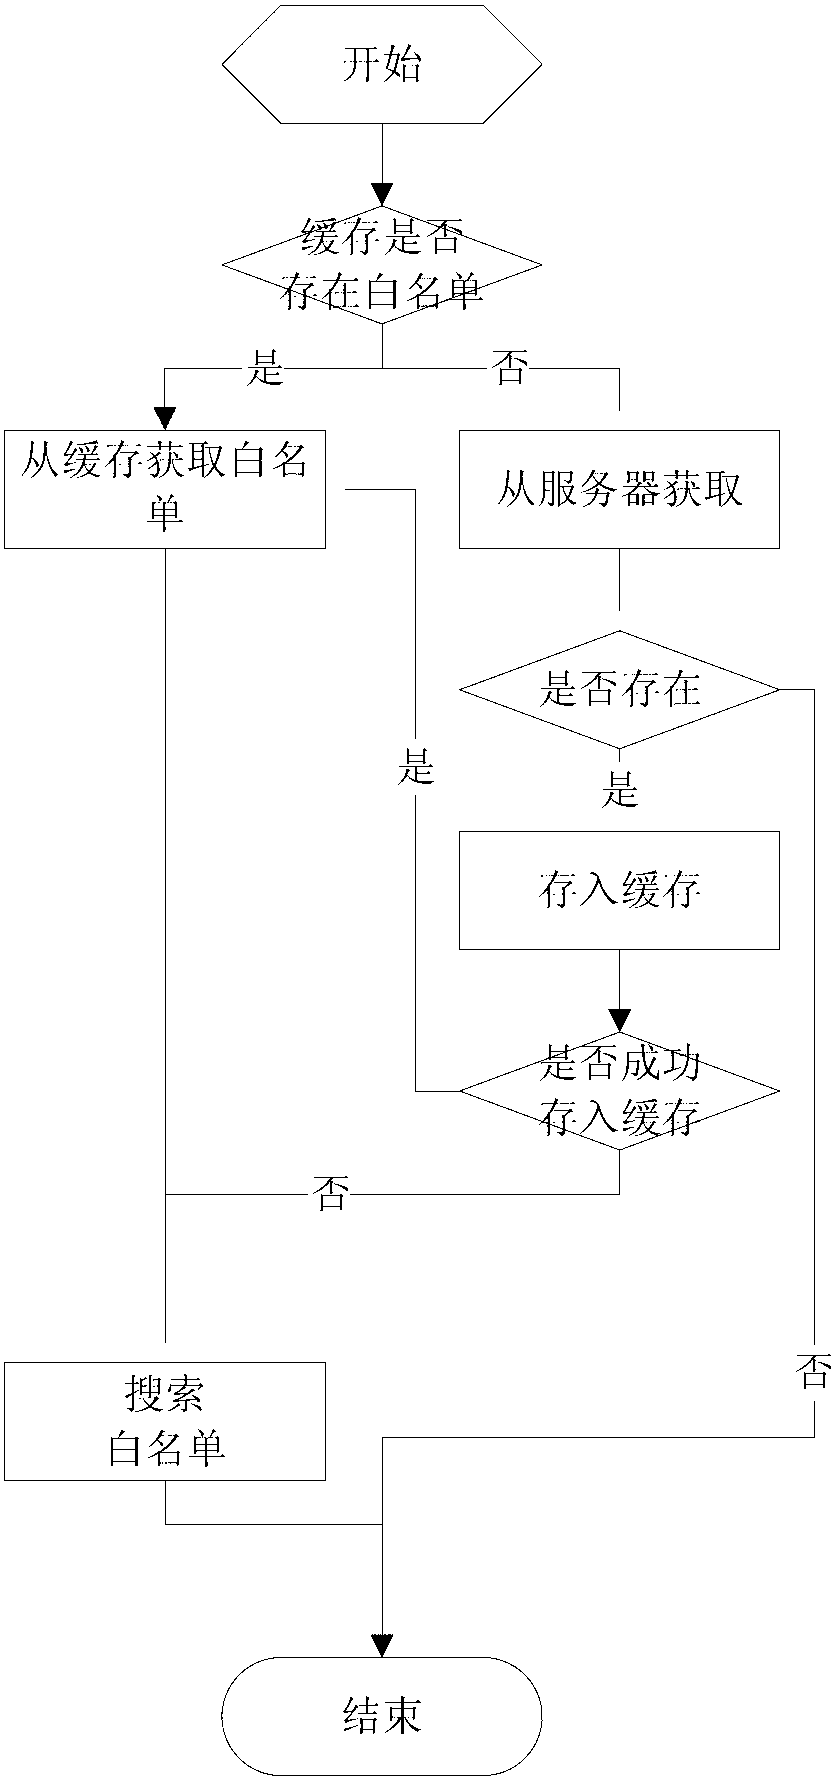 Electronic-payment transaction risk control method and system